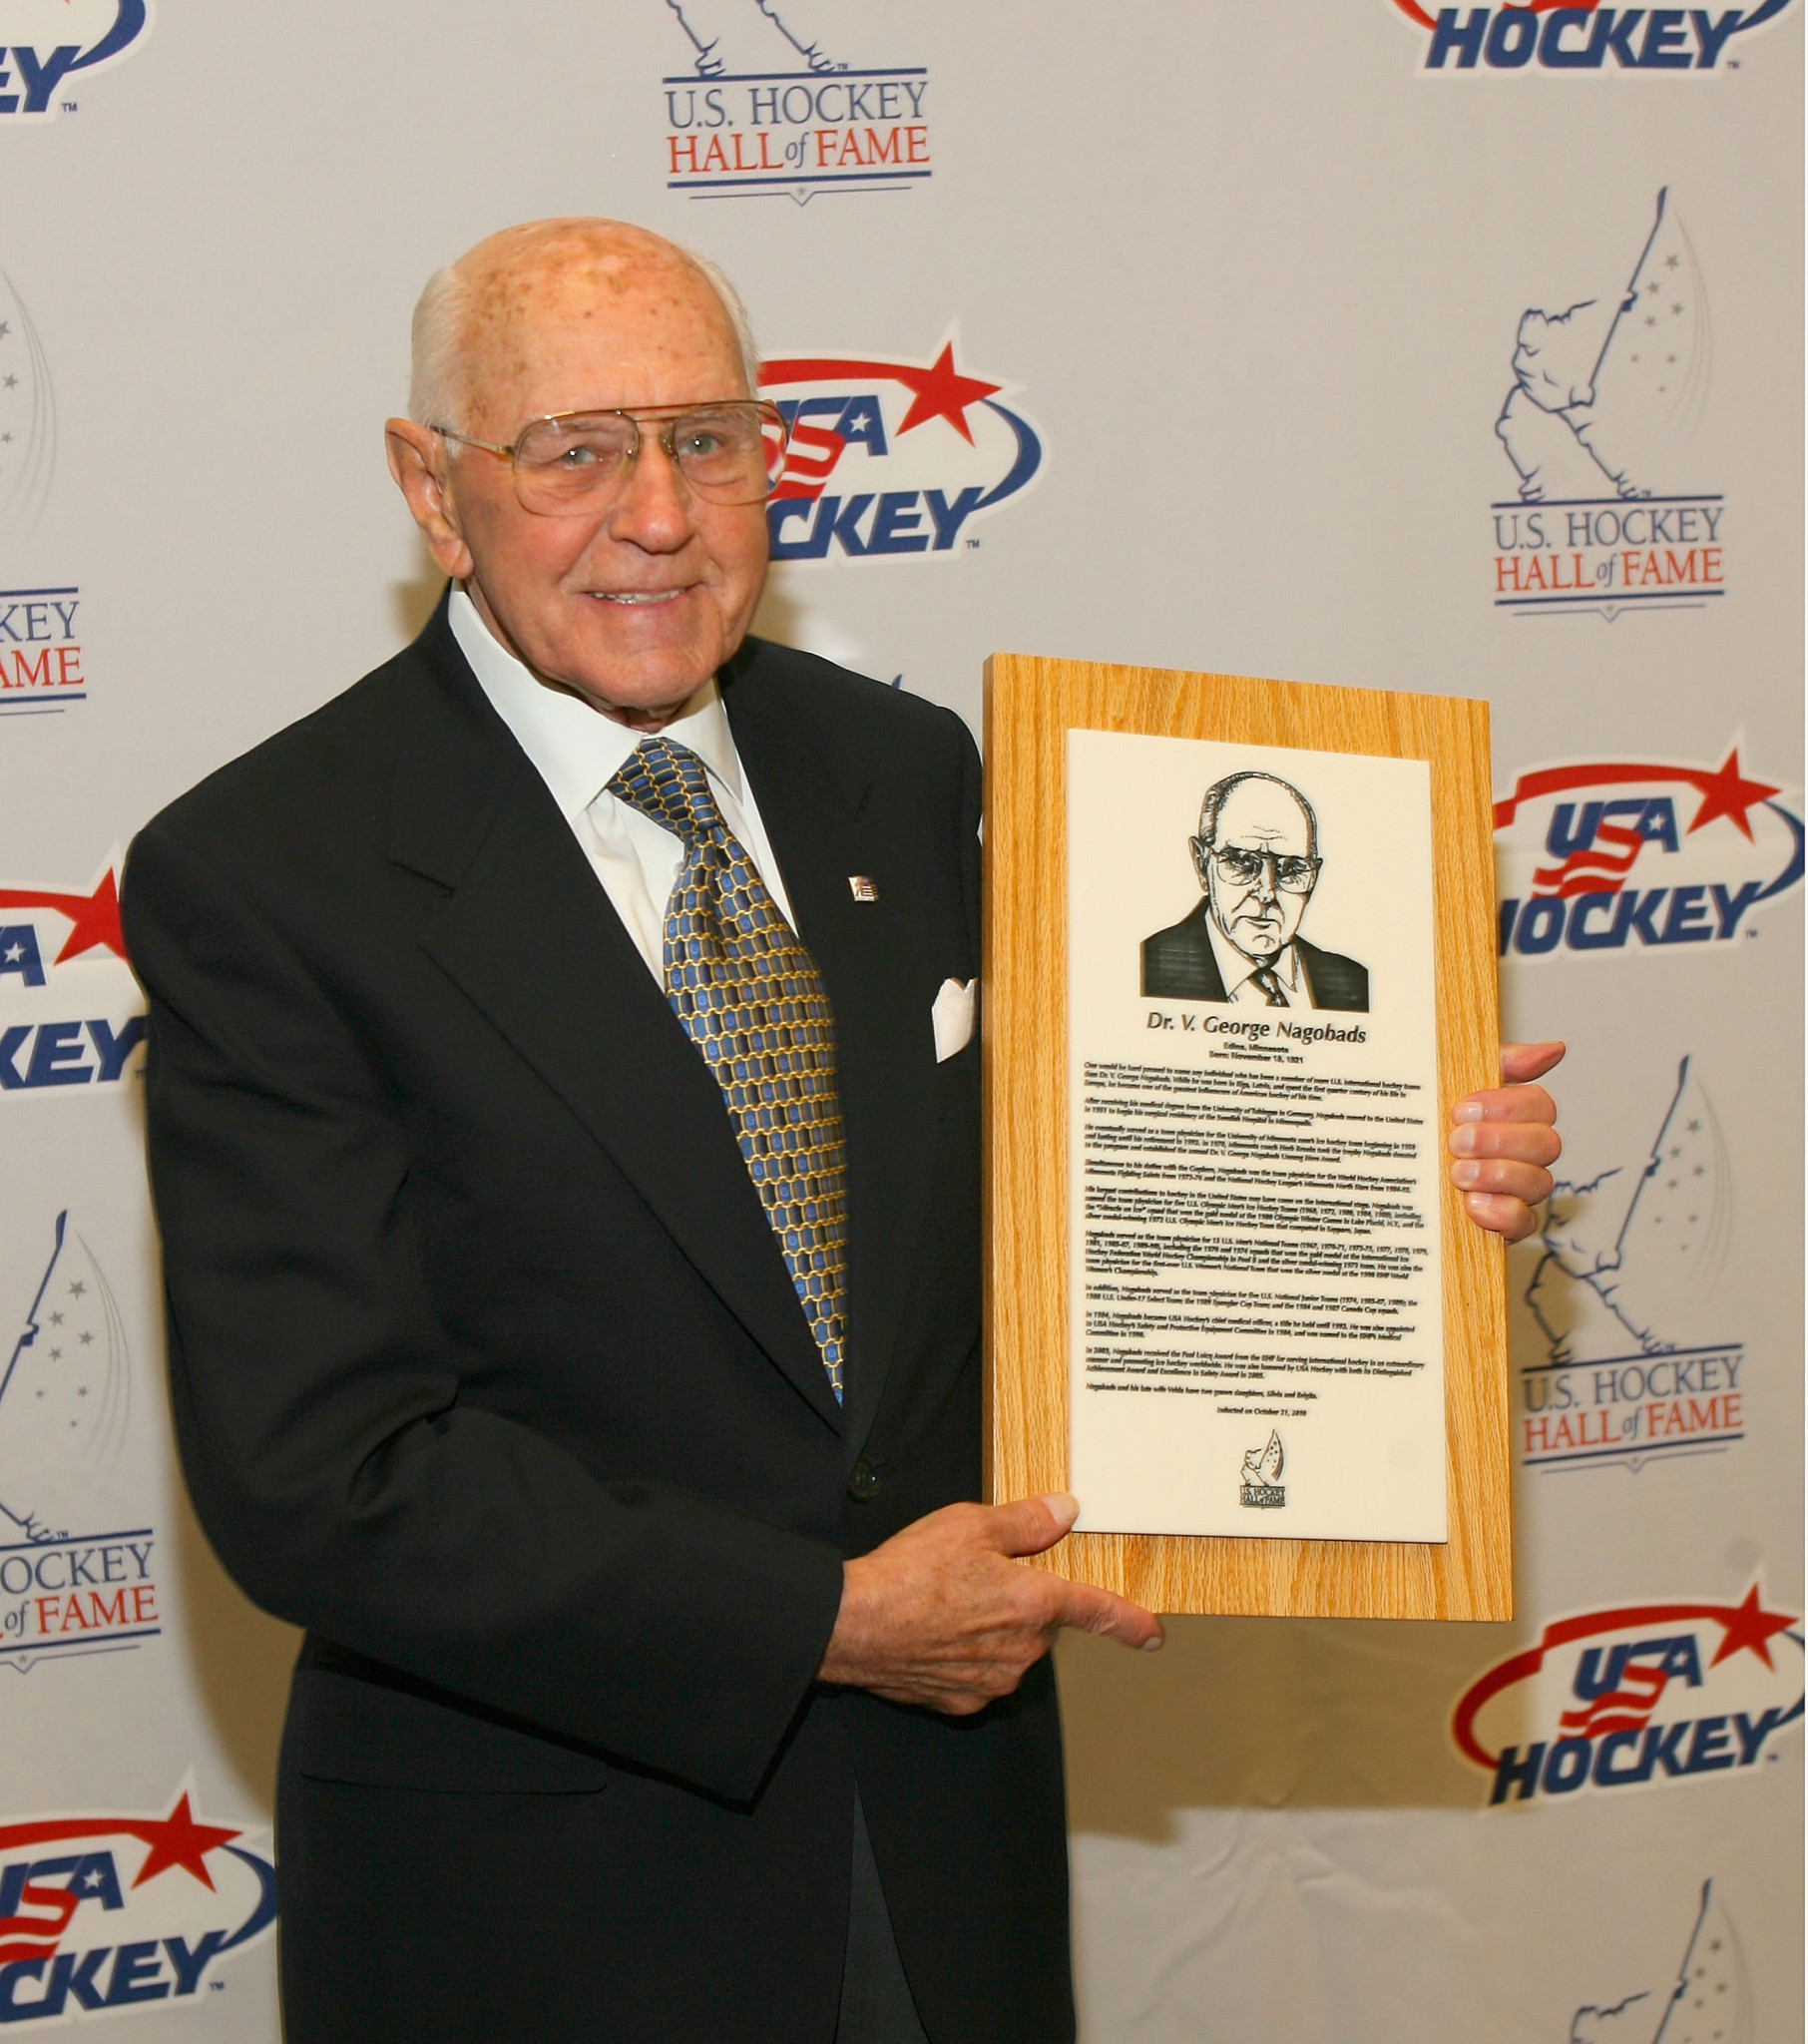 George Nagobads was inducted into the USA Hockey Hall of Fame in 2010 ©Getty Images